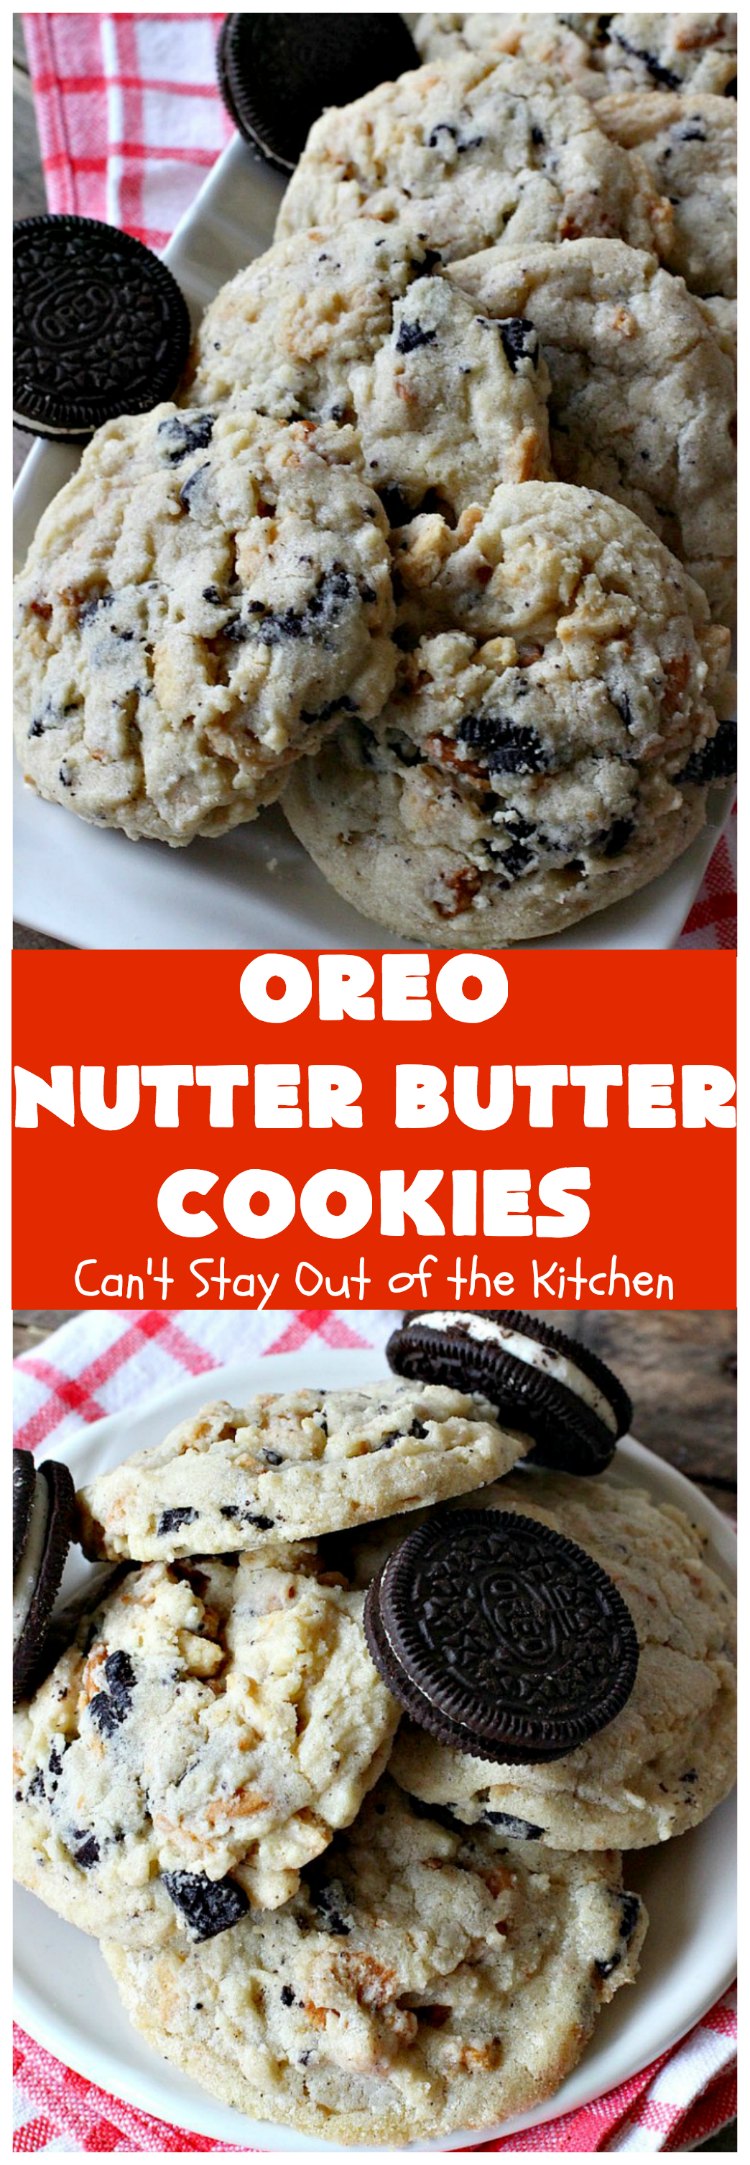 Oreo Nutter Butter Cookies | Can't Stay Out of the Kitchen